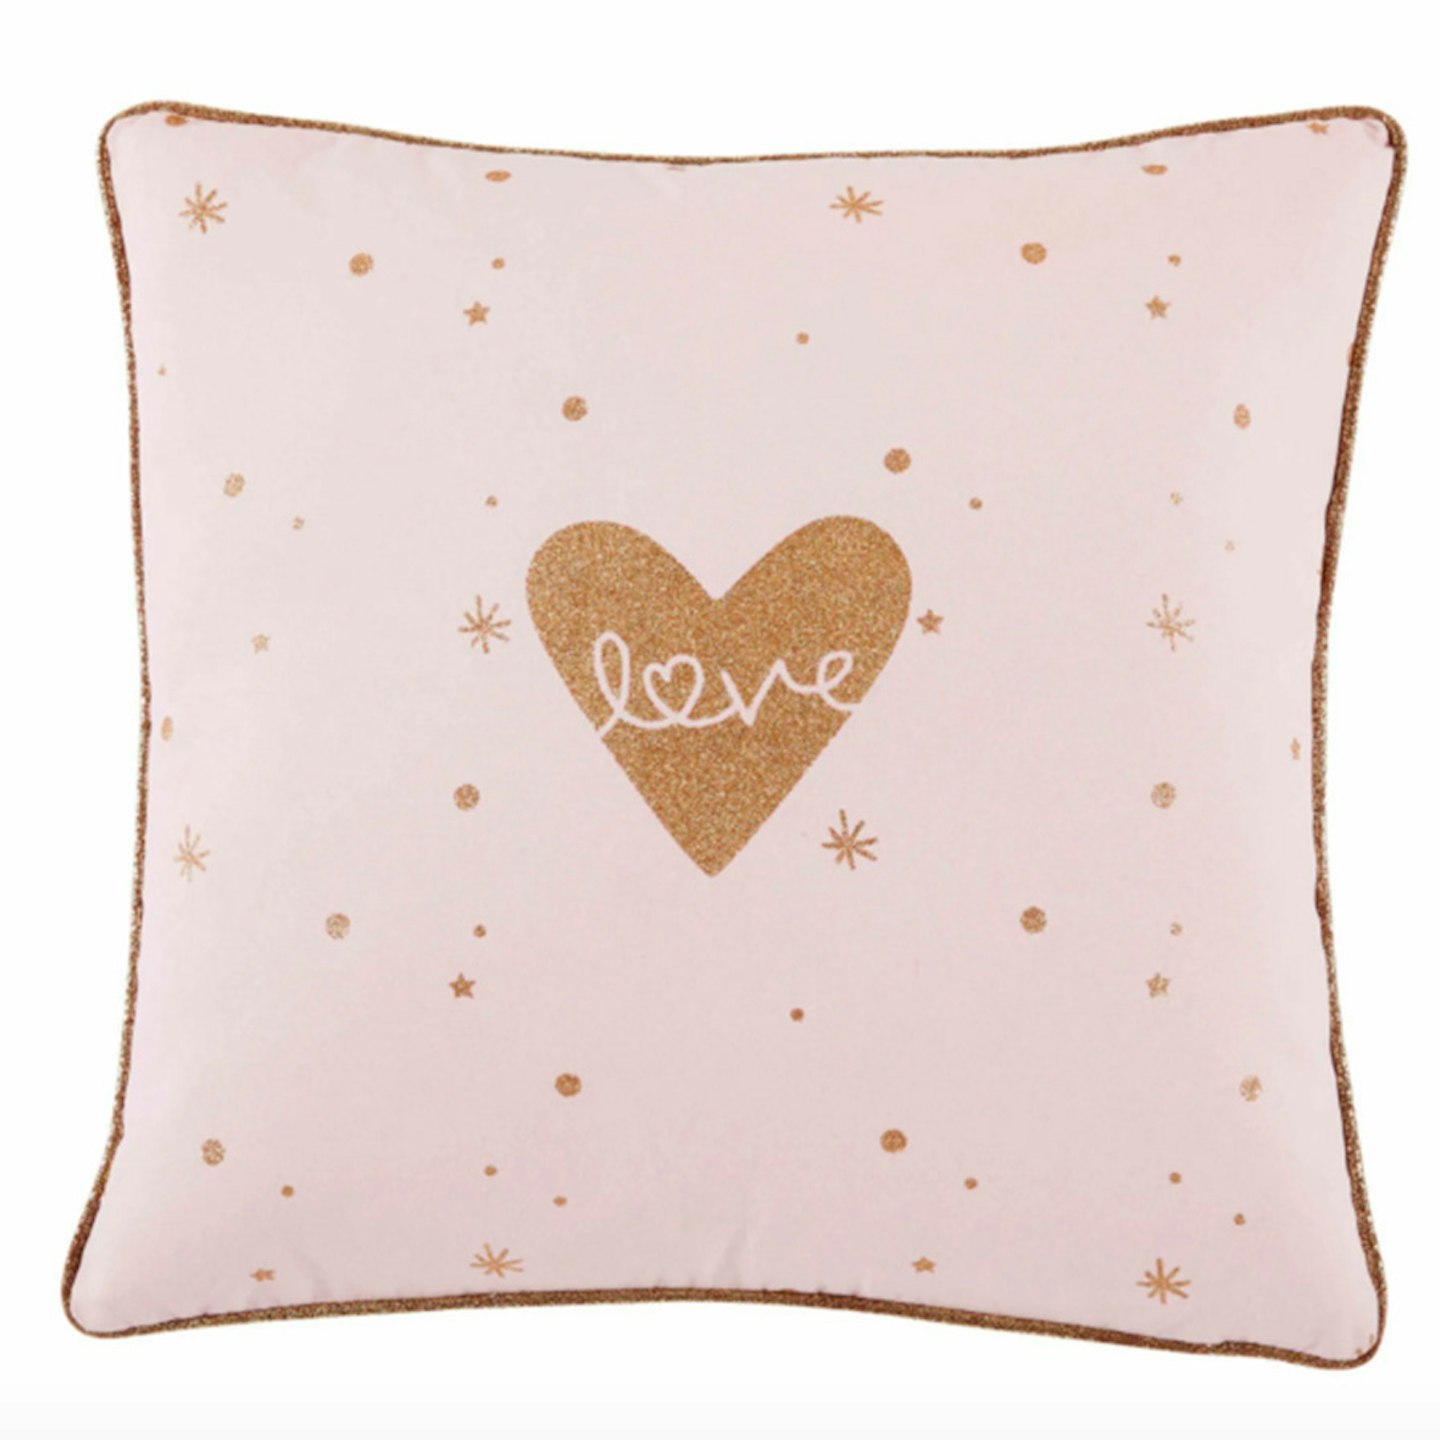 Lilly printed pink cushion, £18